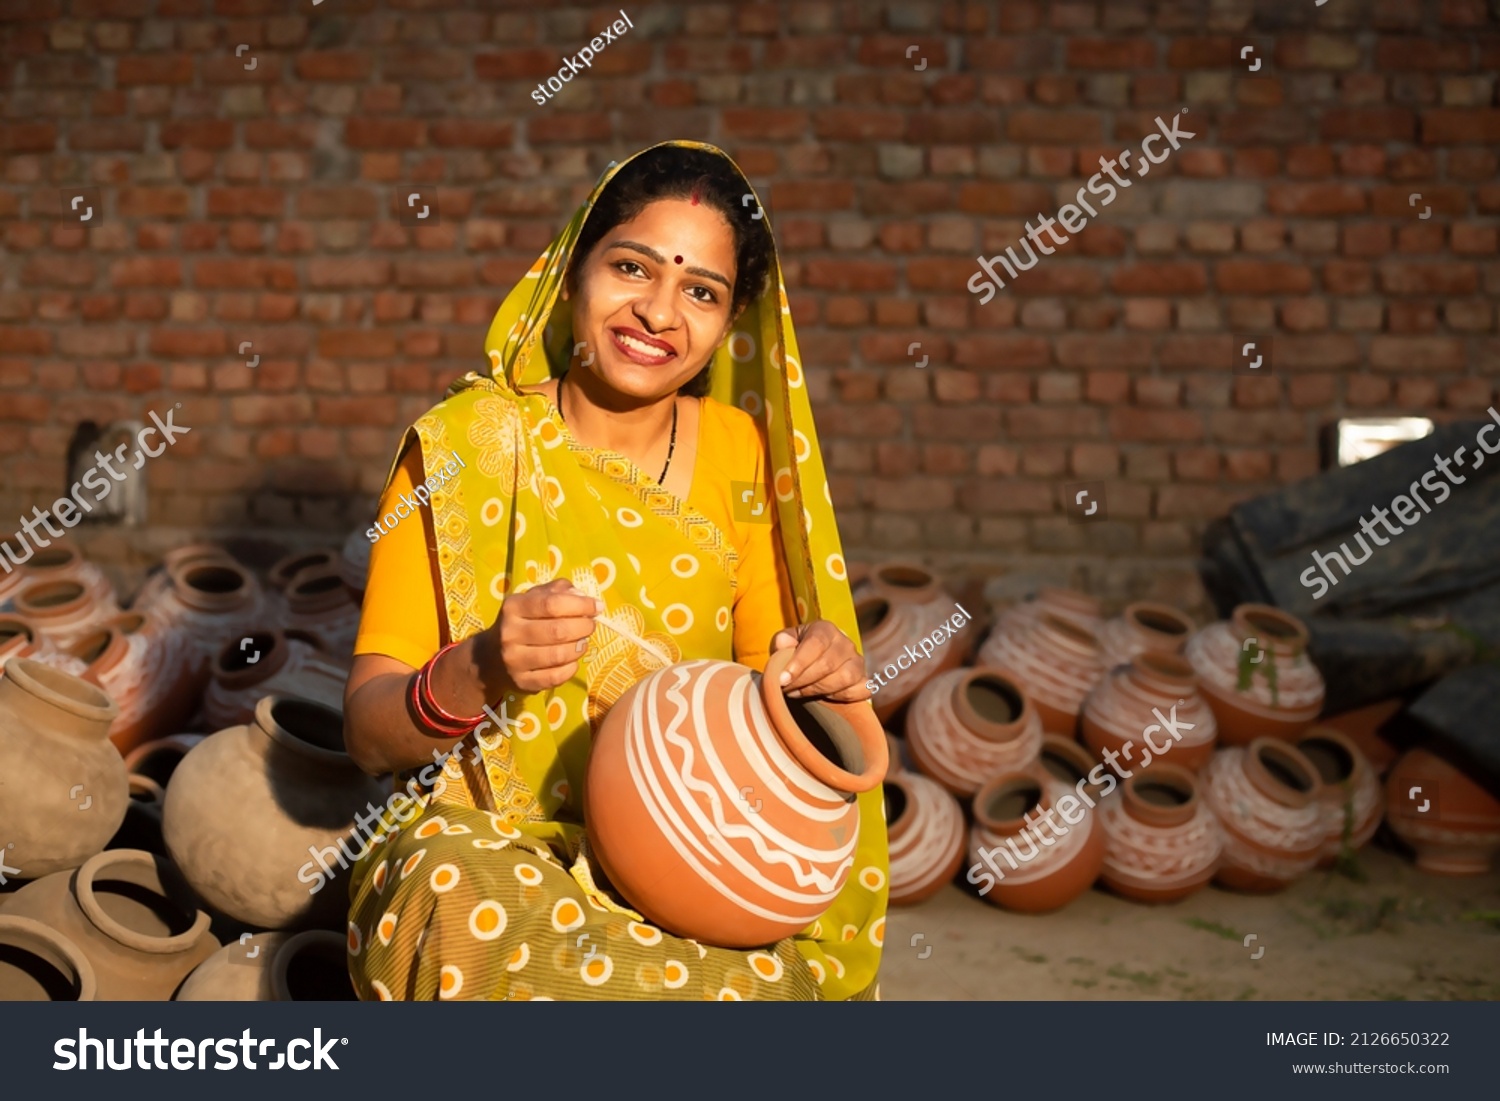 Portrait of happy traditional Indian woman potter artist painting and decorating design on clay pot for sale, handicraft, skill india. #2126650322